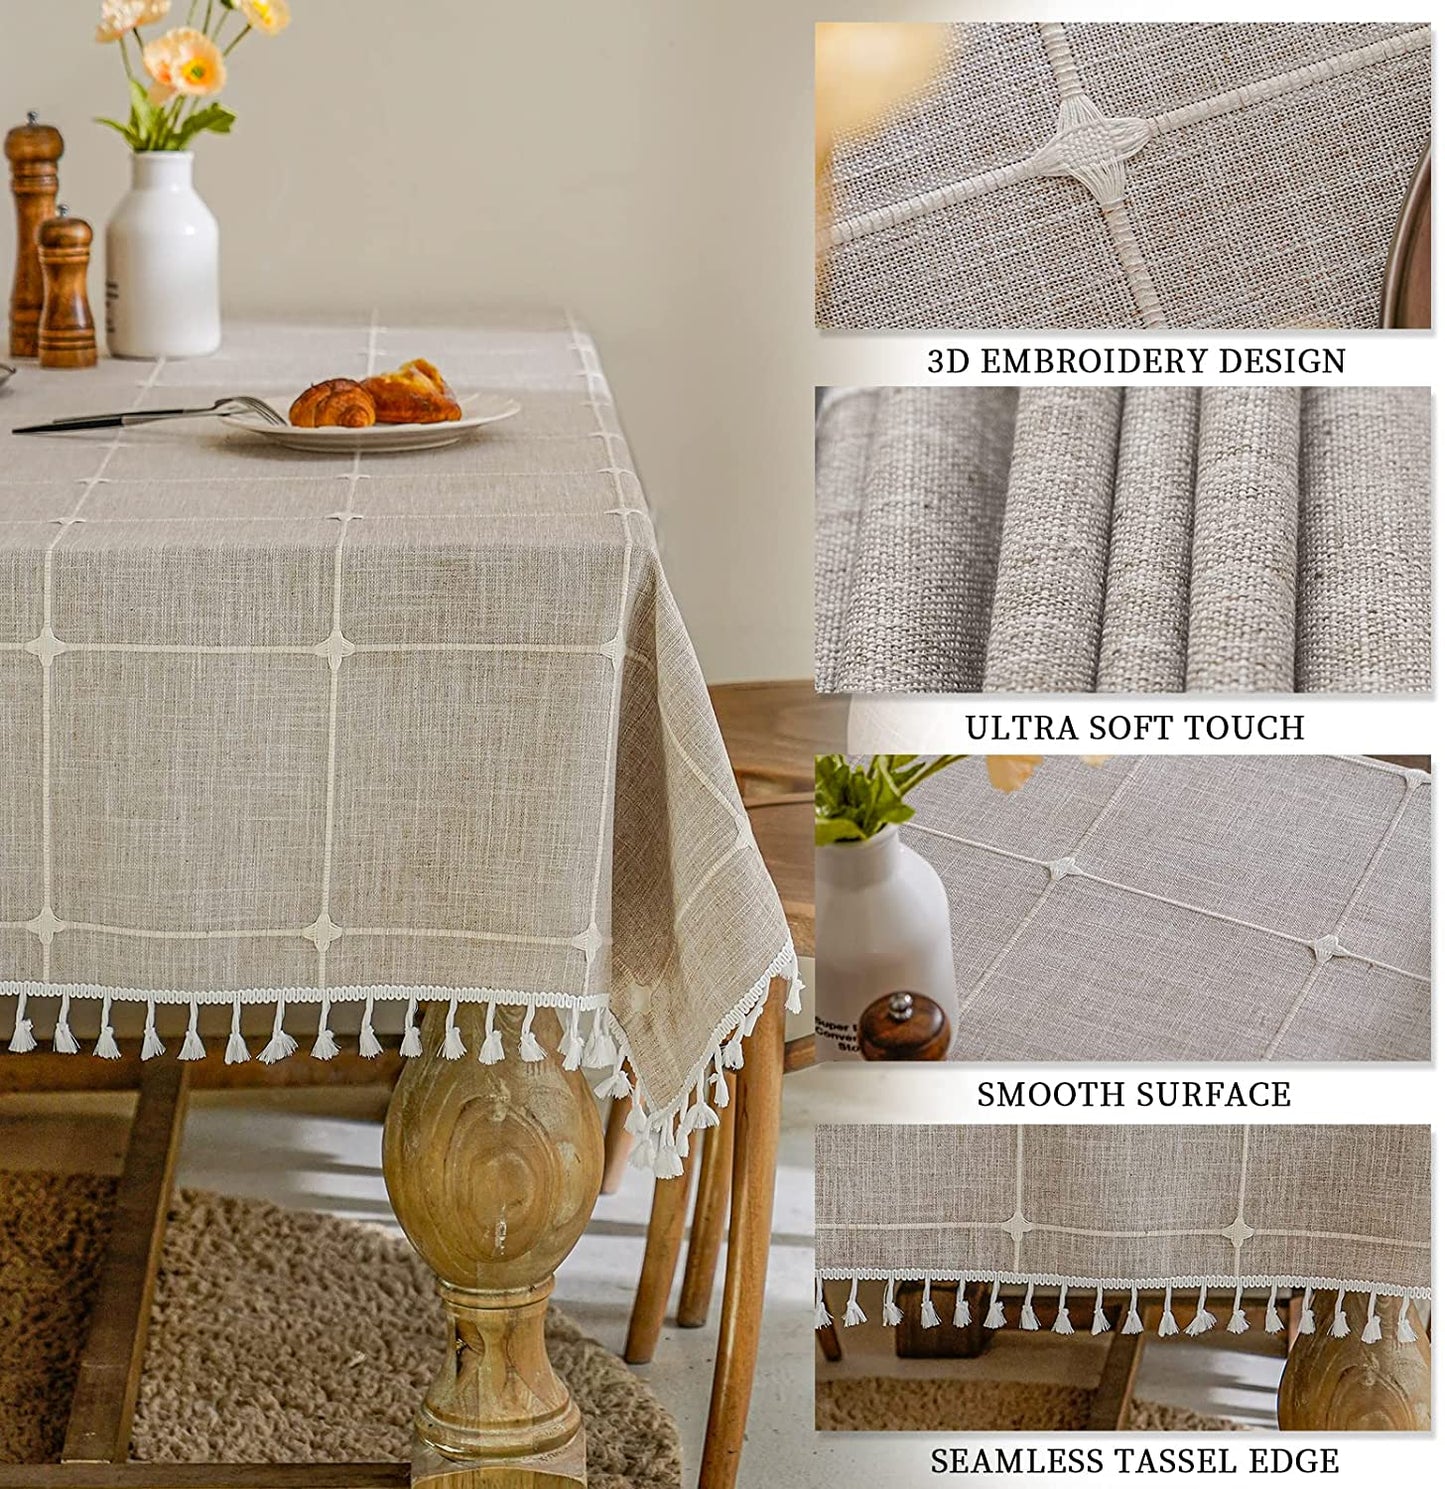 Mokani Solid Embroidery Checkered Table Cloth Washable Cotton Linen Tassel Tablecloth, Rectangle Wrinkle Free Anti-Fading Table Cover for Kitchen Dinning Thanksgiving Christmas (55 x 94 Inch, Brown) - (For 6 piece(s))